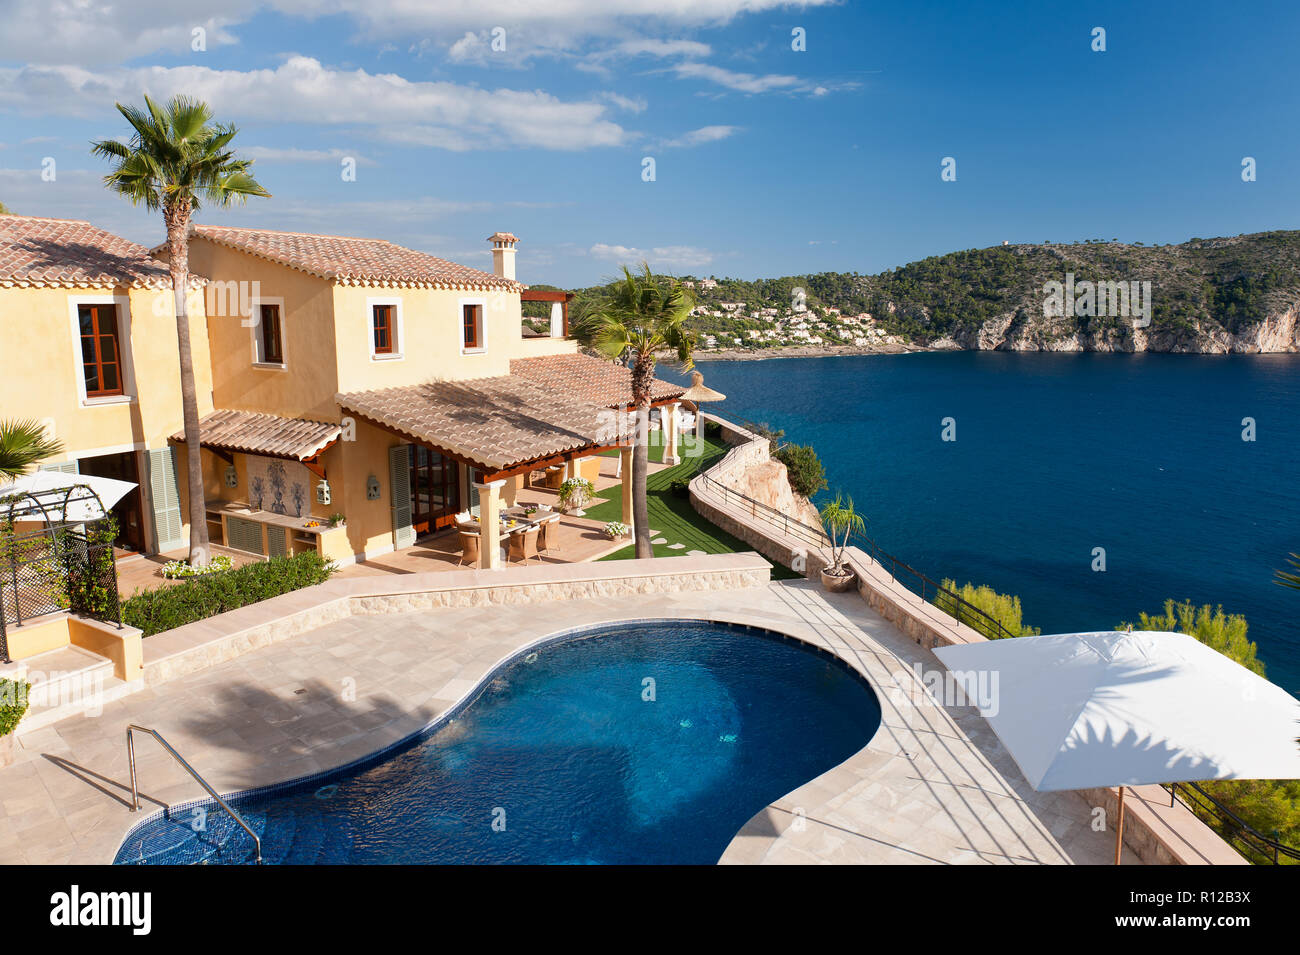 Mediterranean house with swimming pool Stock Photo